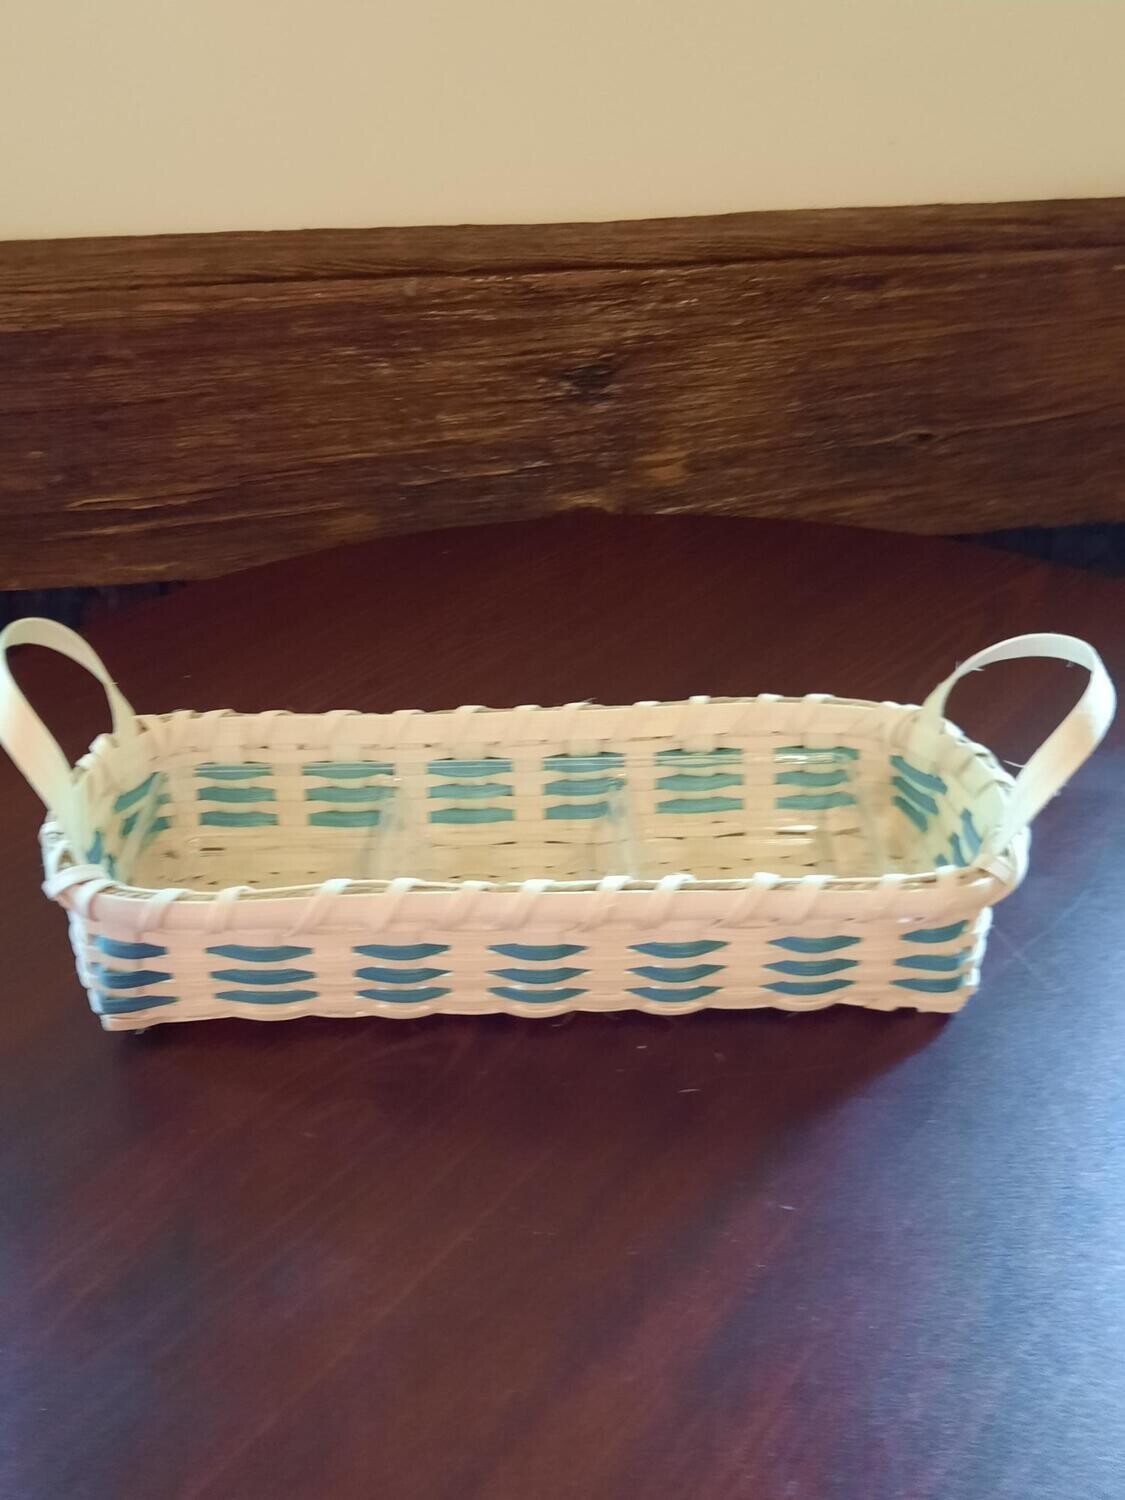 Basket Making Workshop*3 Compartment Tabletop Organizer*July 10th*12pm